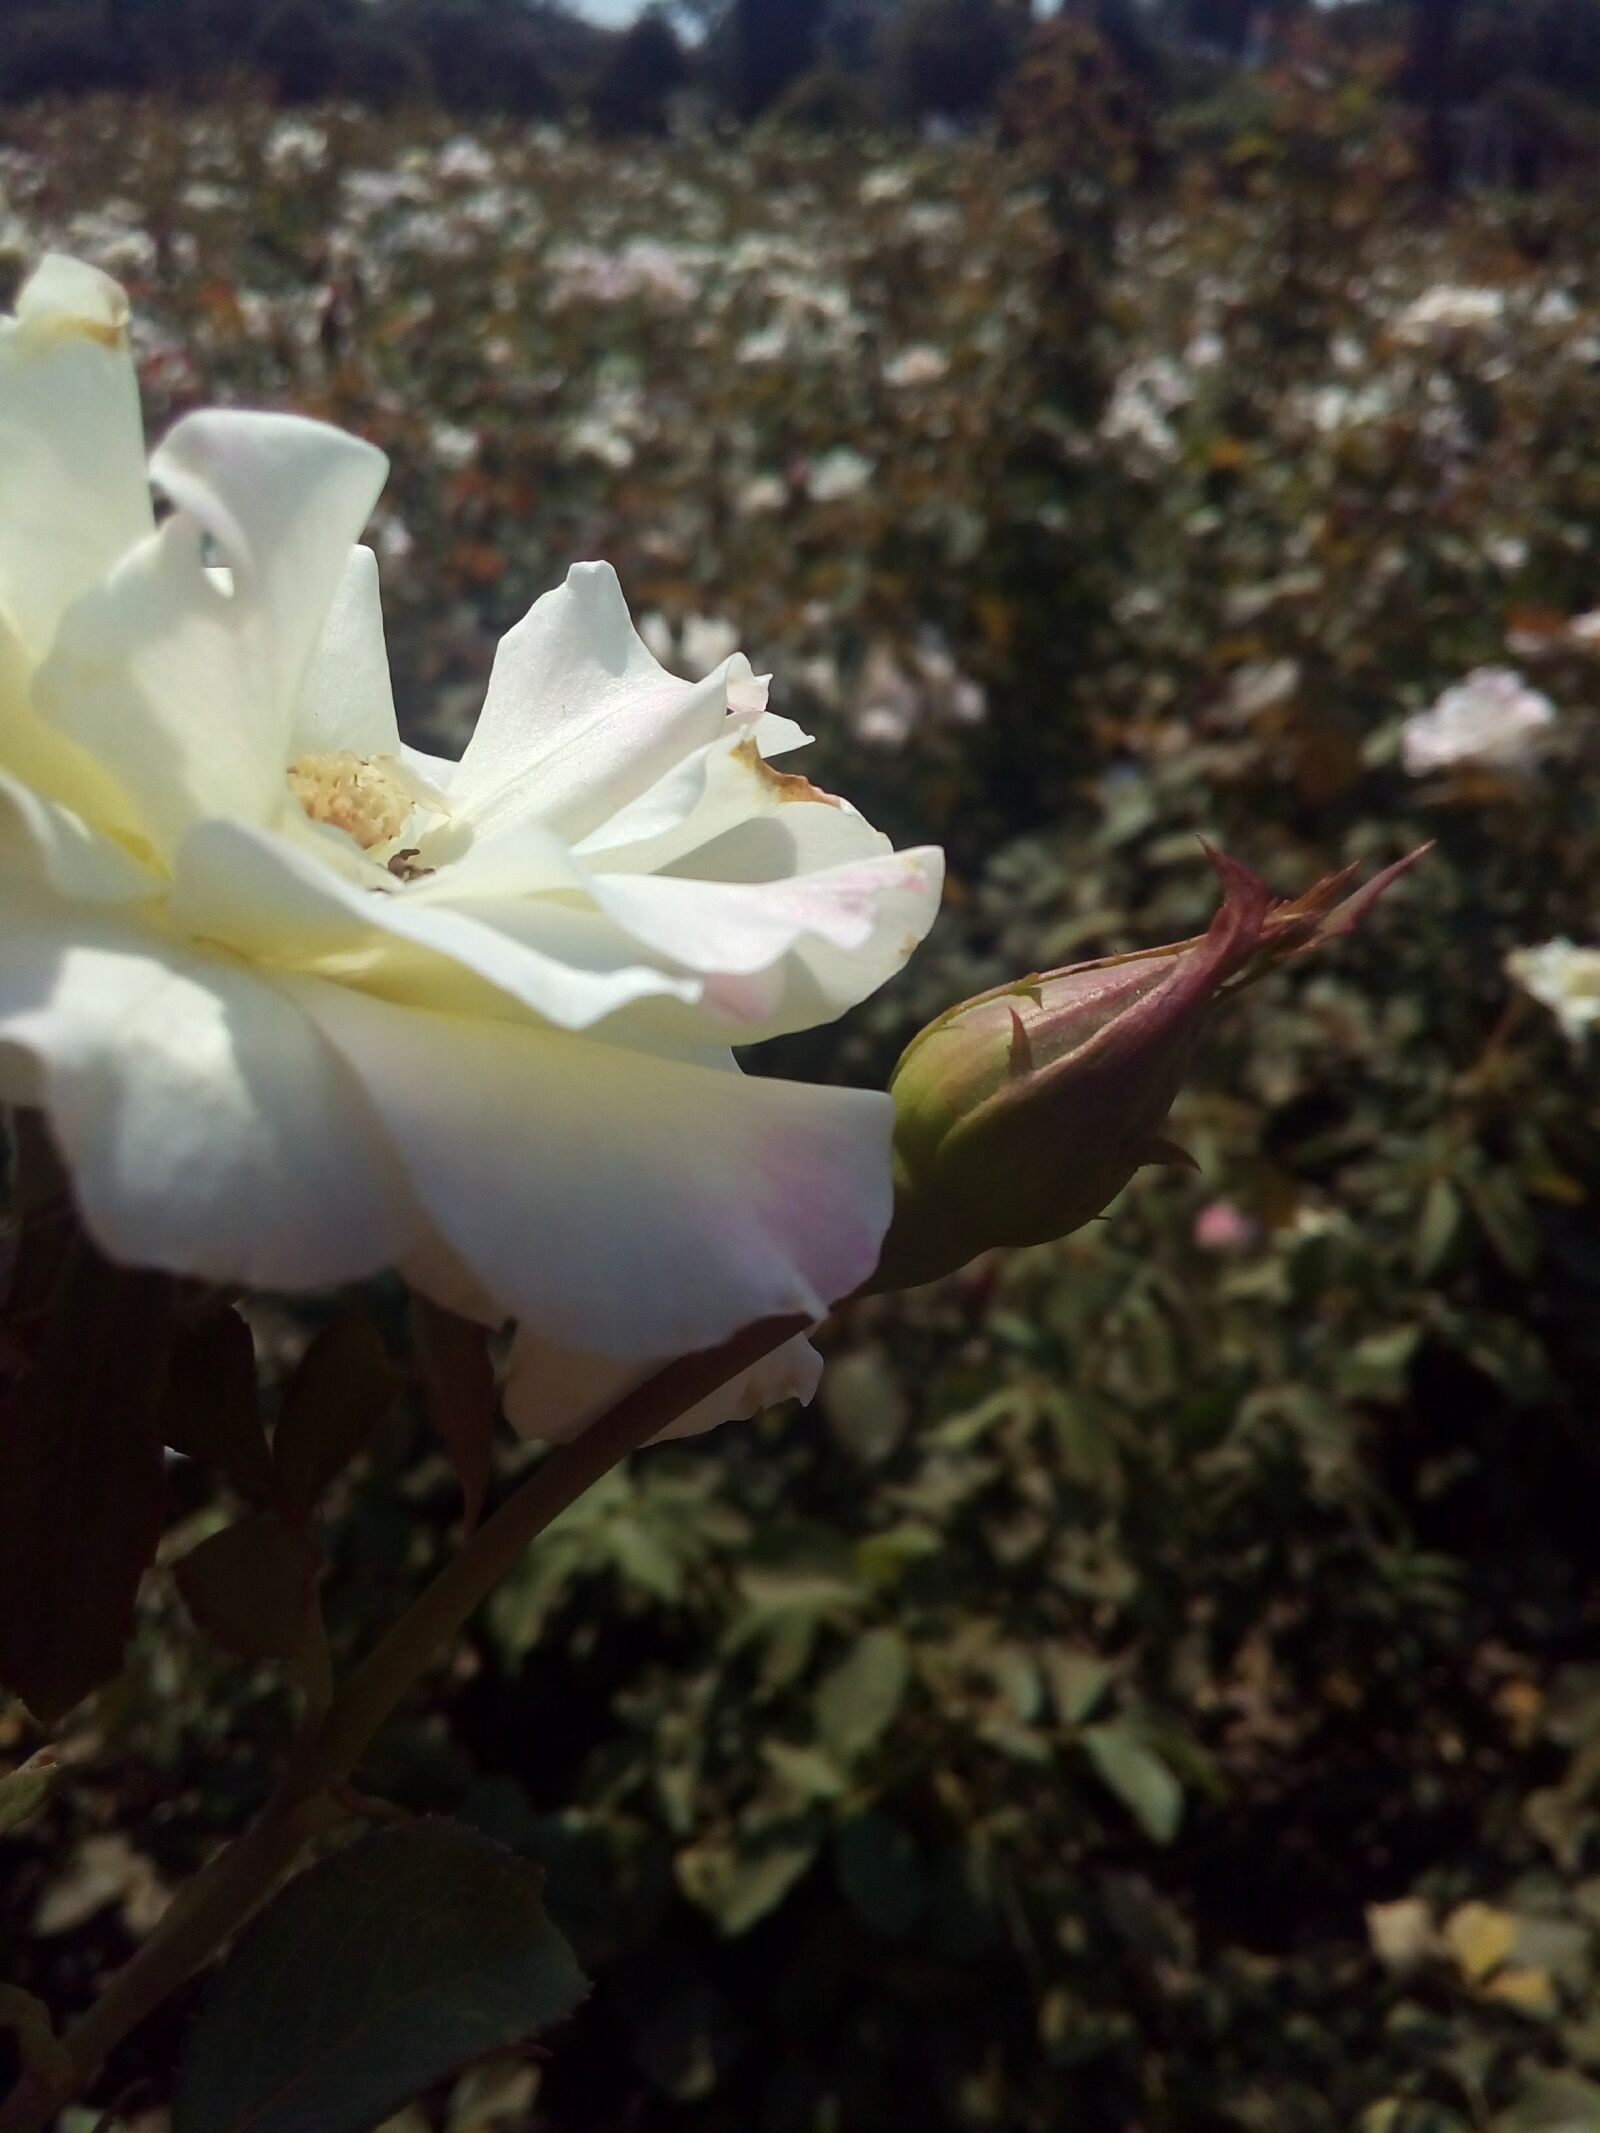 ASUS LIVE (G500TG) sample photo. Flower, flowers, nature photography